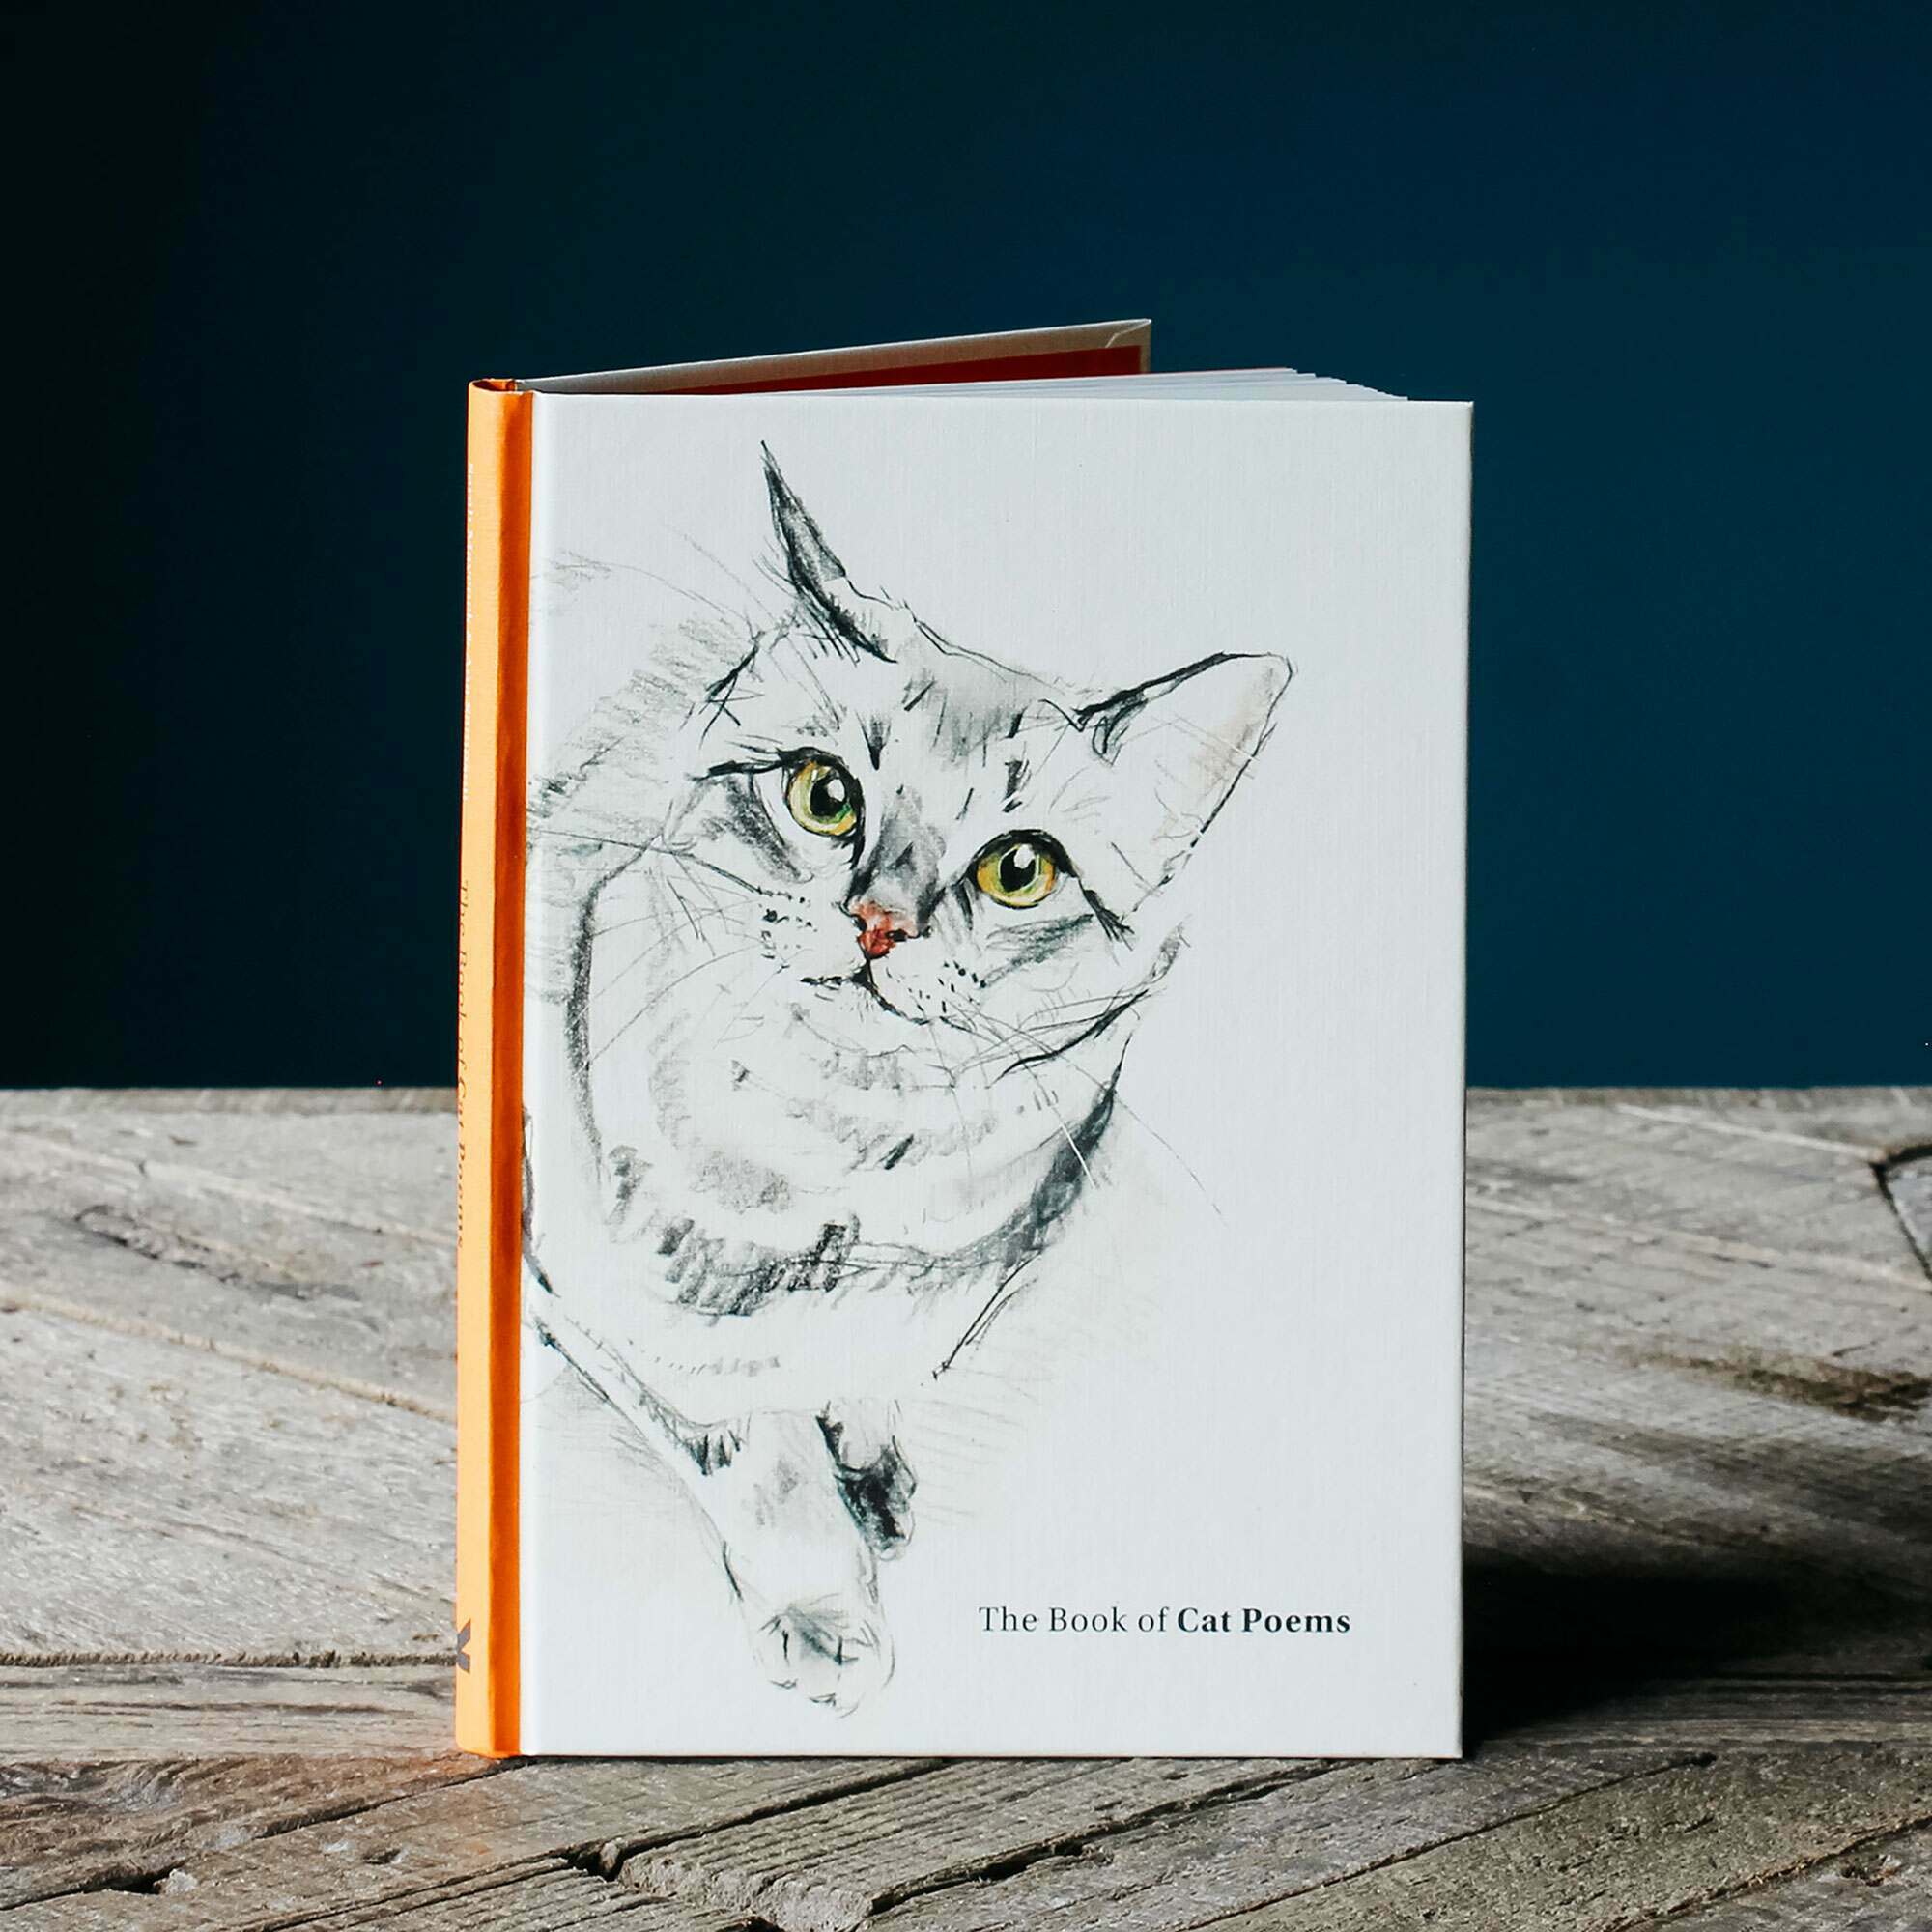 Read more about Graham and green book of cat poems